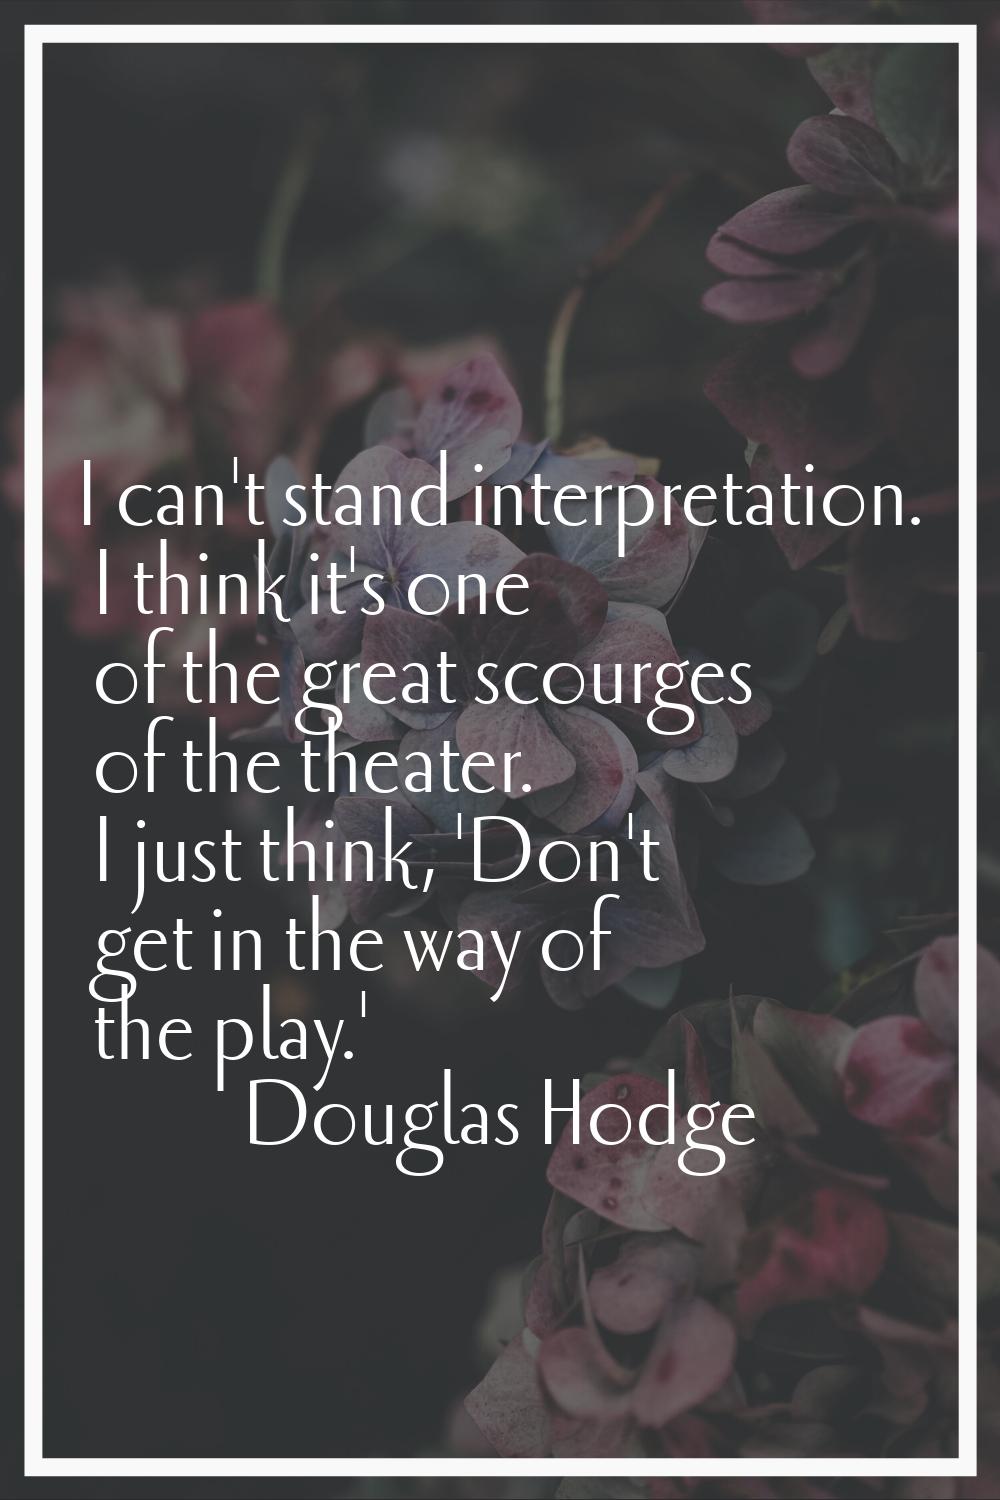 I can't stand interpretation. I think it's one of the great scourges of the theater. I just think, 